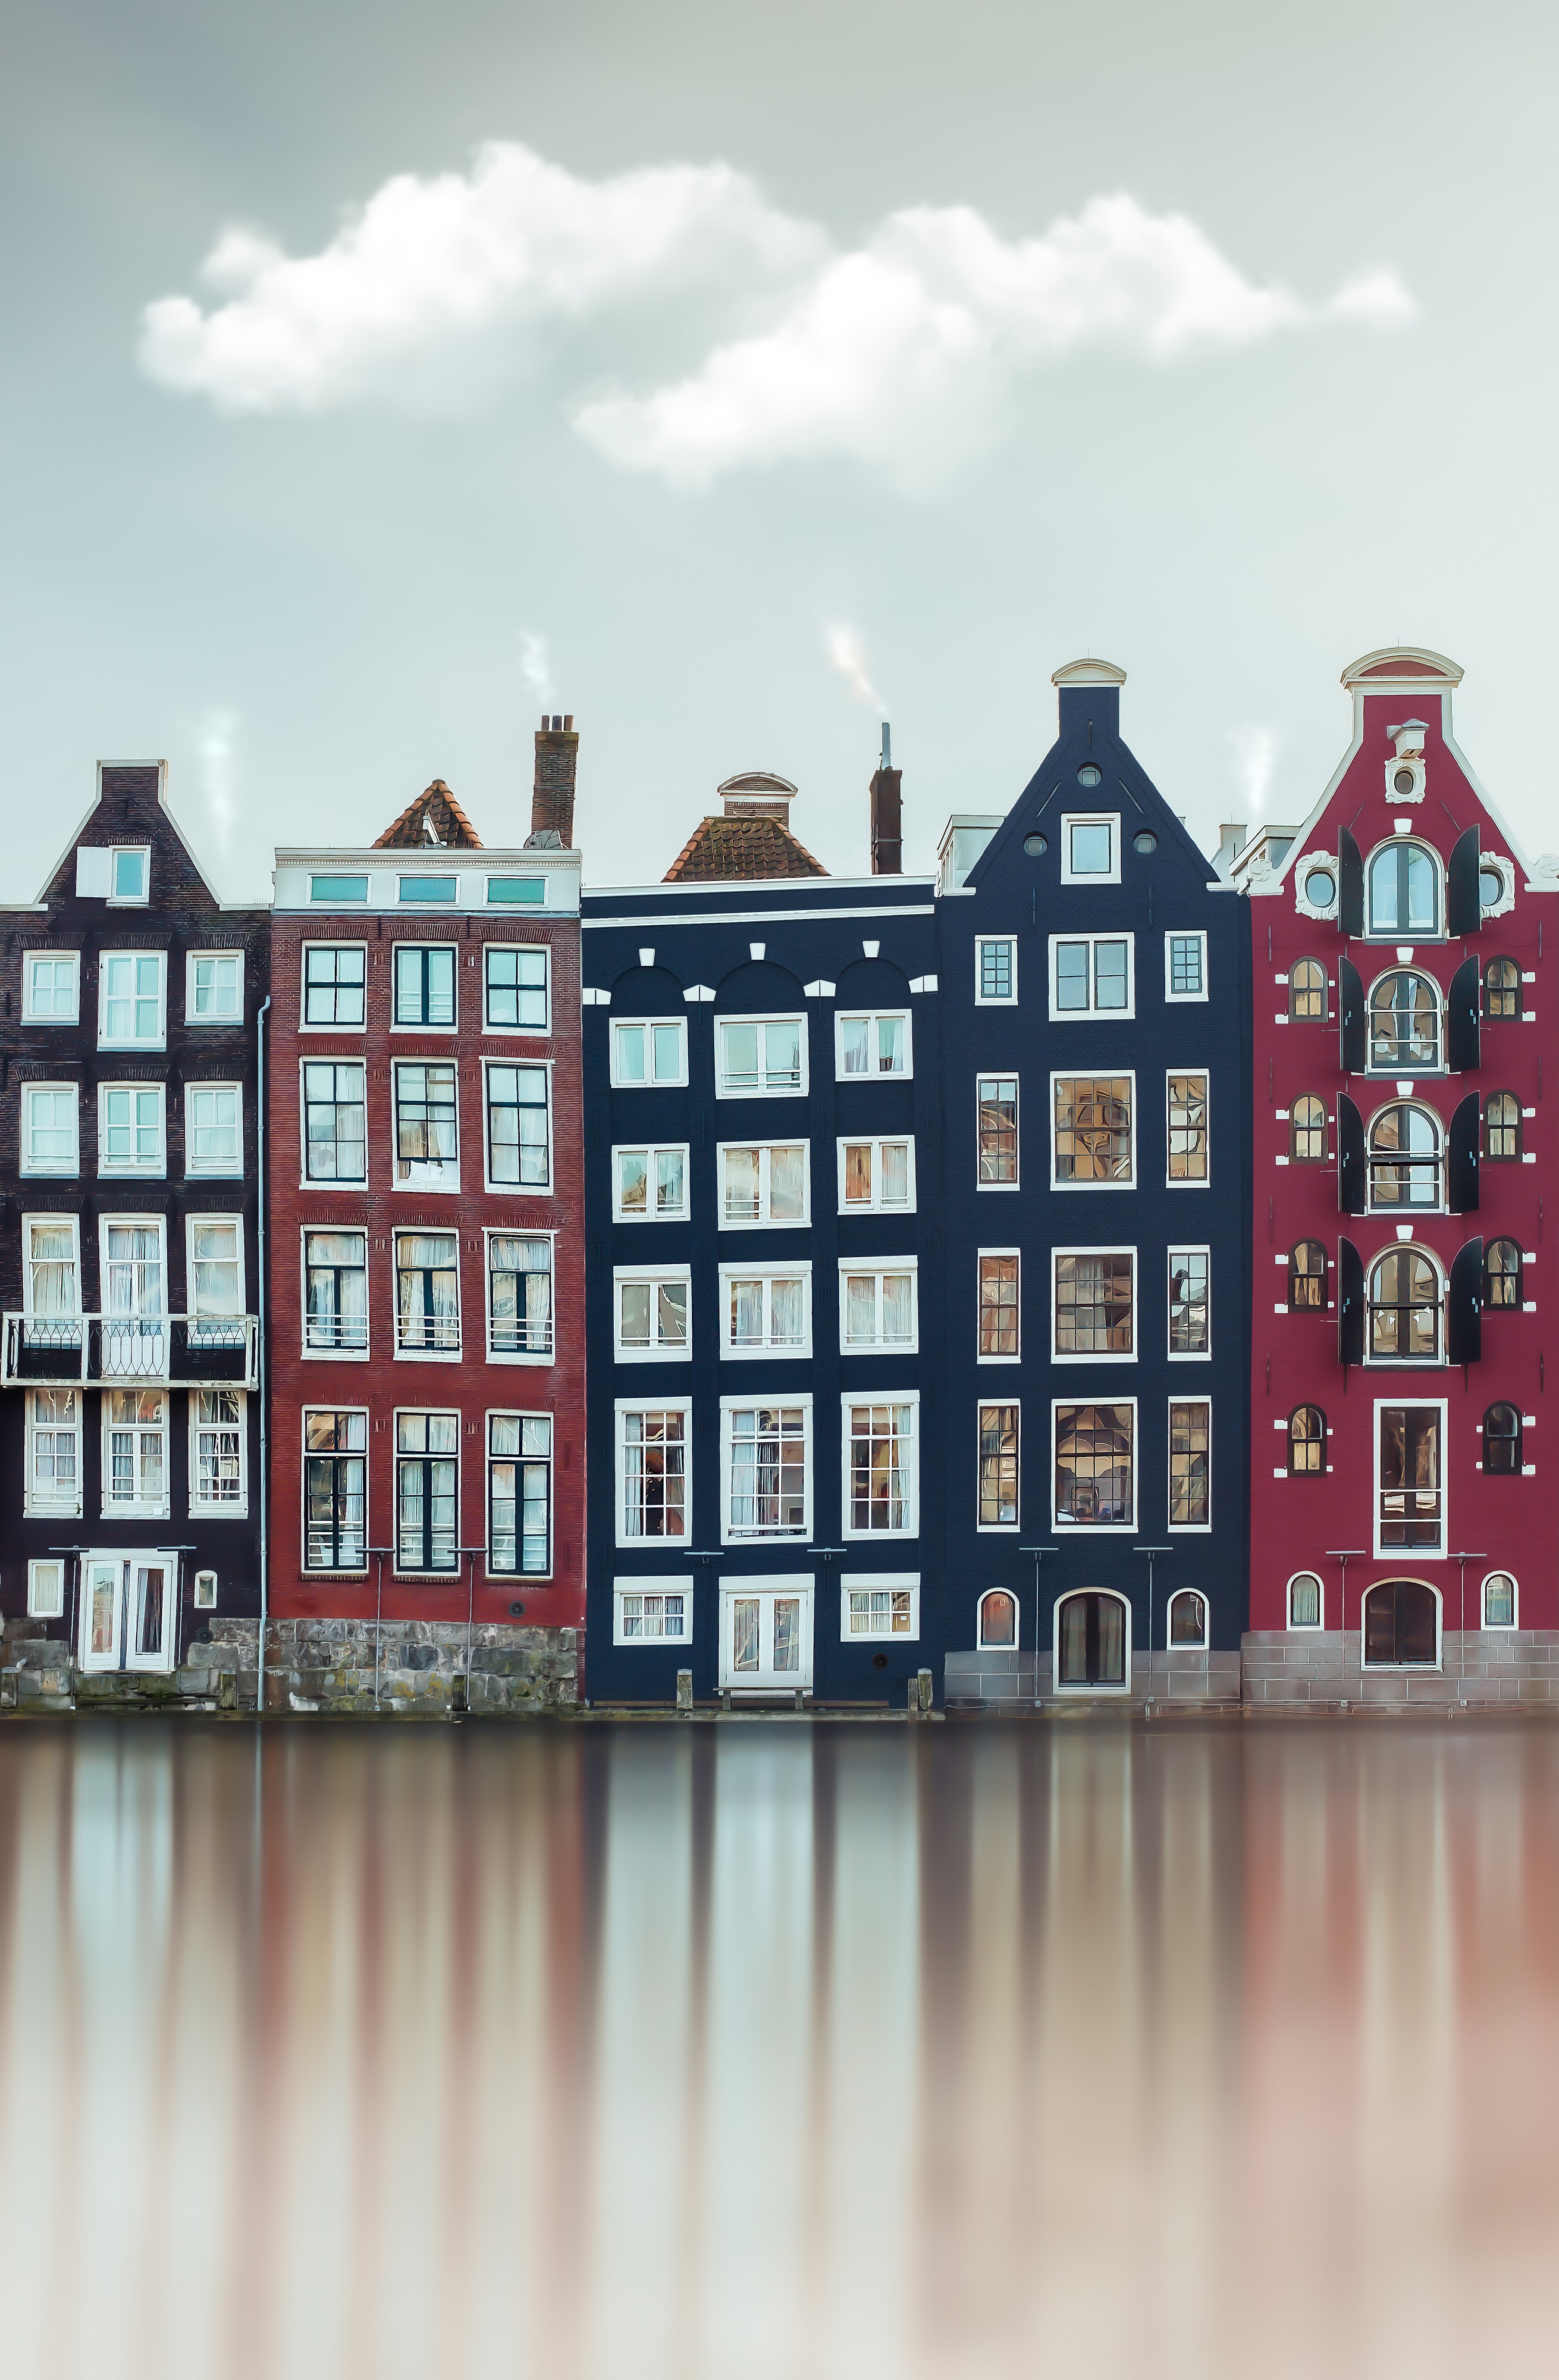 PC Wallpapers cities, water, houses, rivers, city, building, facade